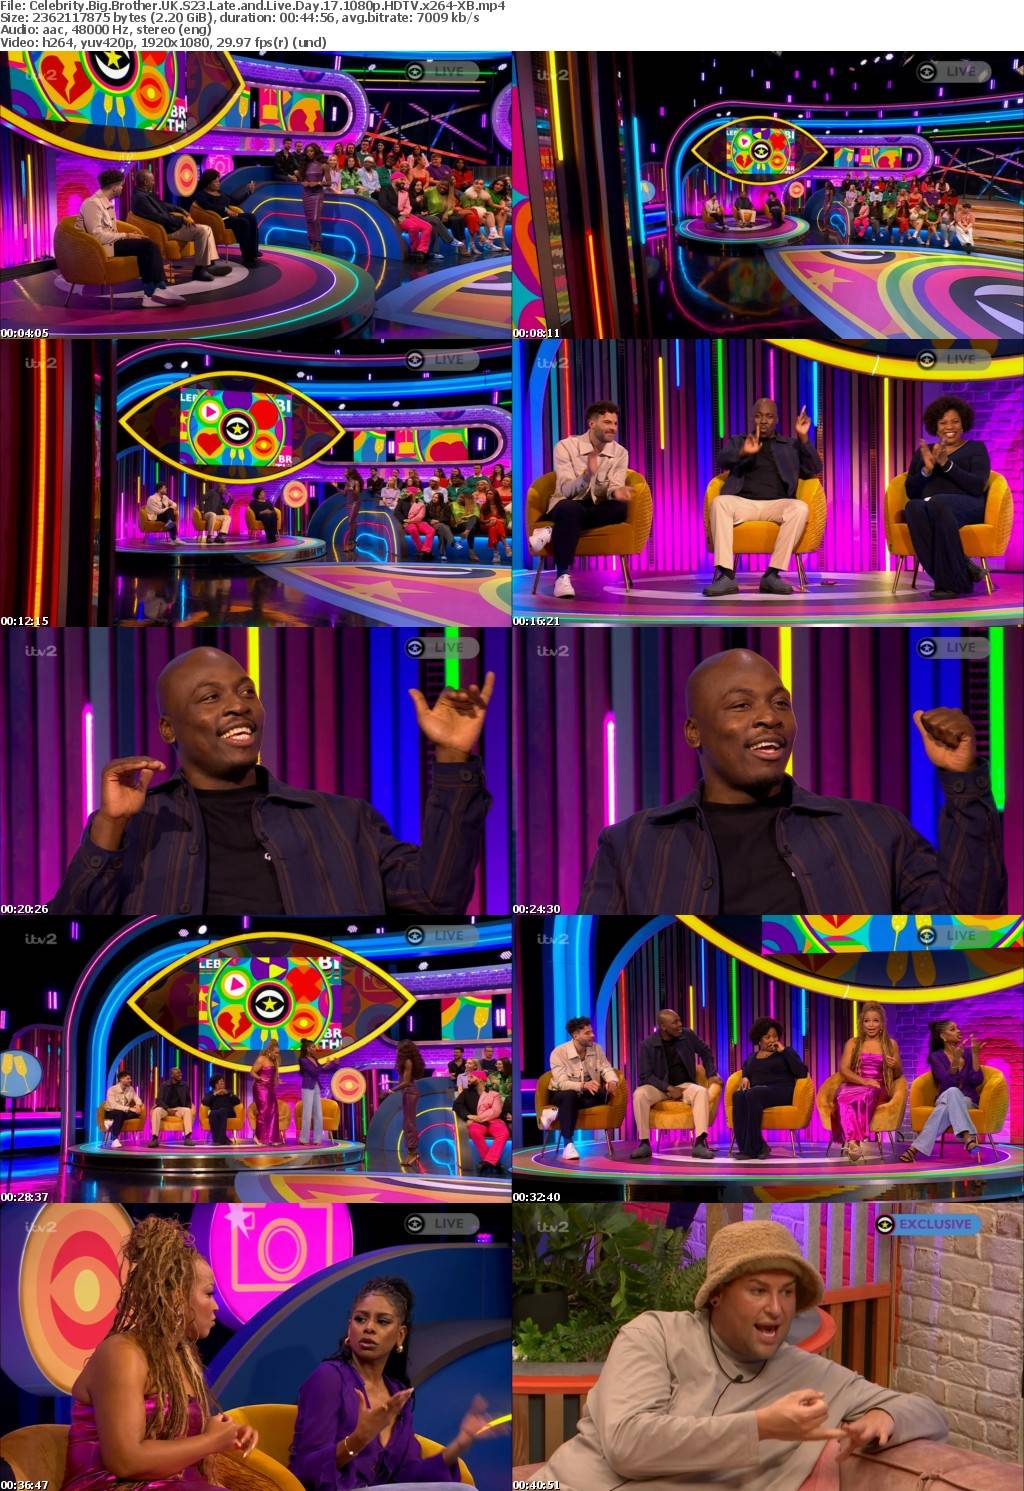 Celebrity Big Brother UK S23 Late and Live Day 17 1080p HDTV x264-XB